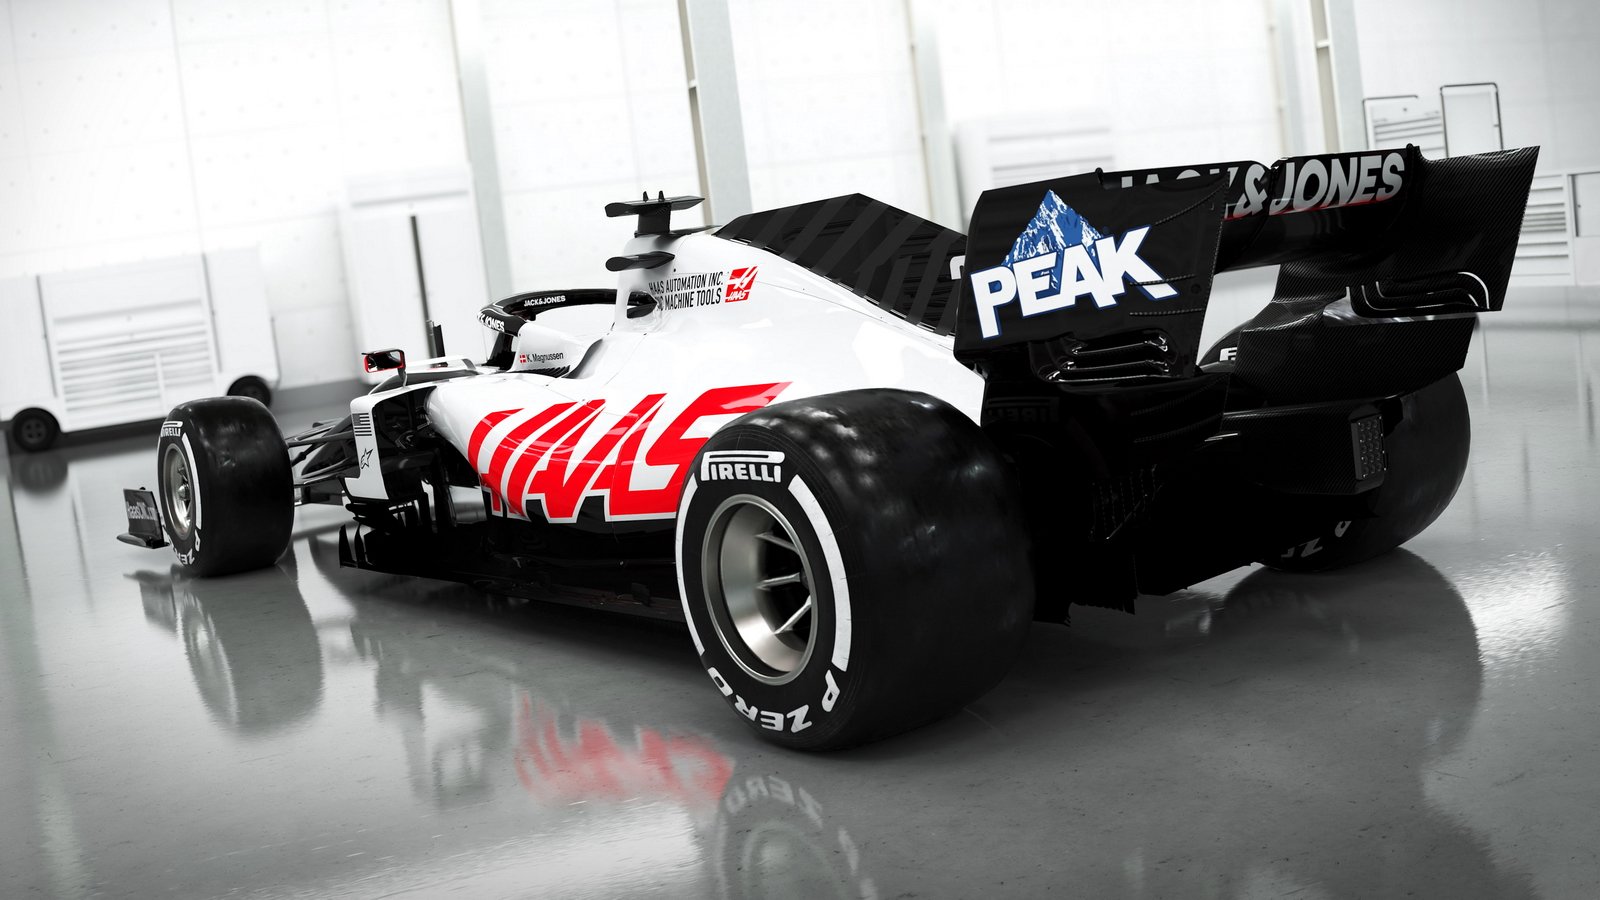 HAAS F1 VF 20 LAUNCH PHOTO GALLERY